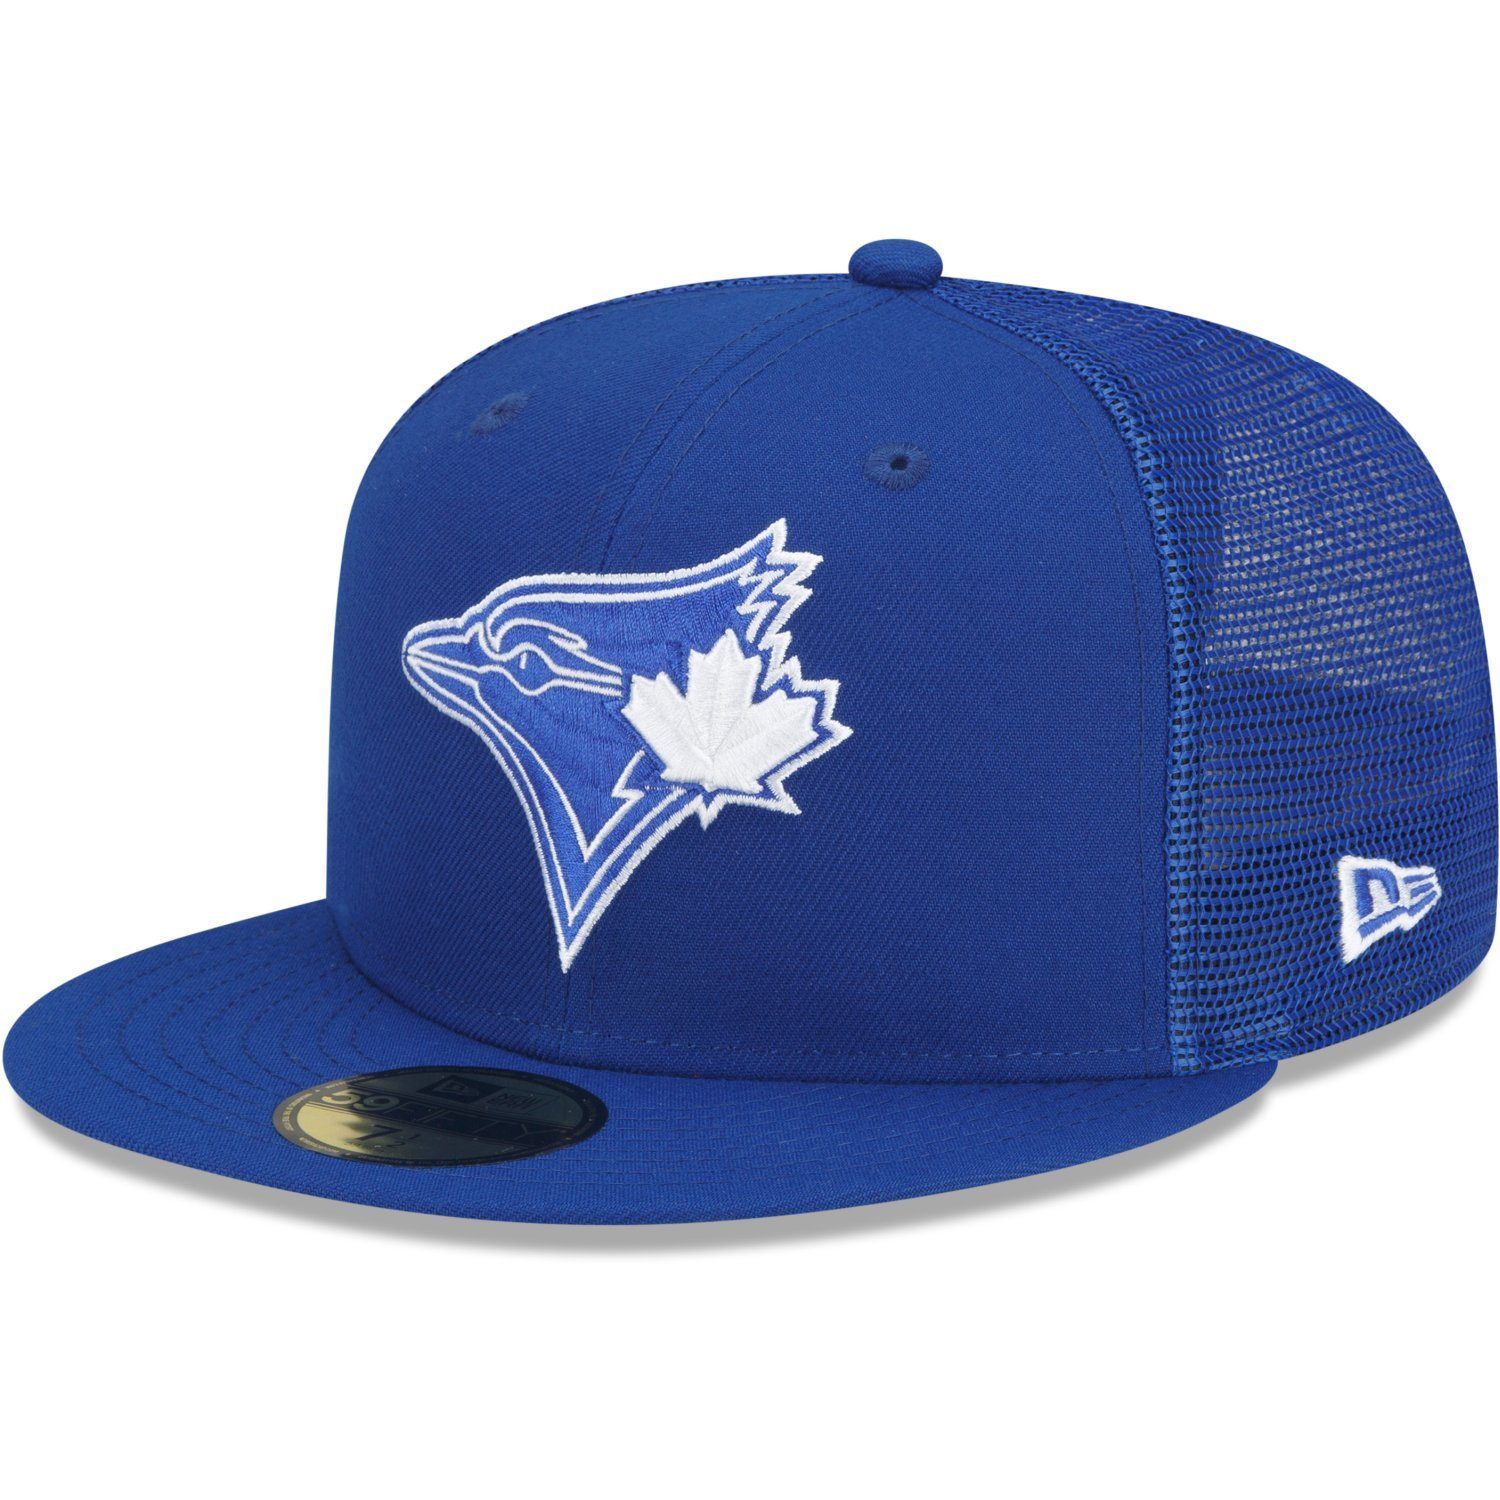 New Era Fitted Cap 59Fifty BATTING PRACTICE Toronto Jays